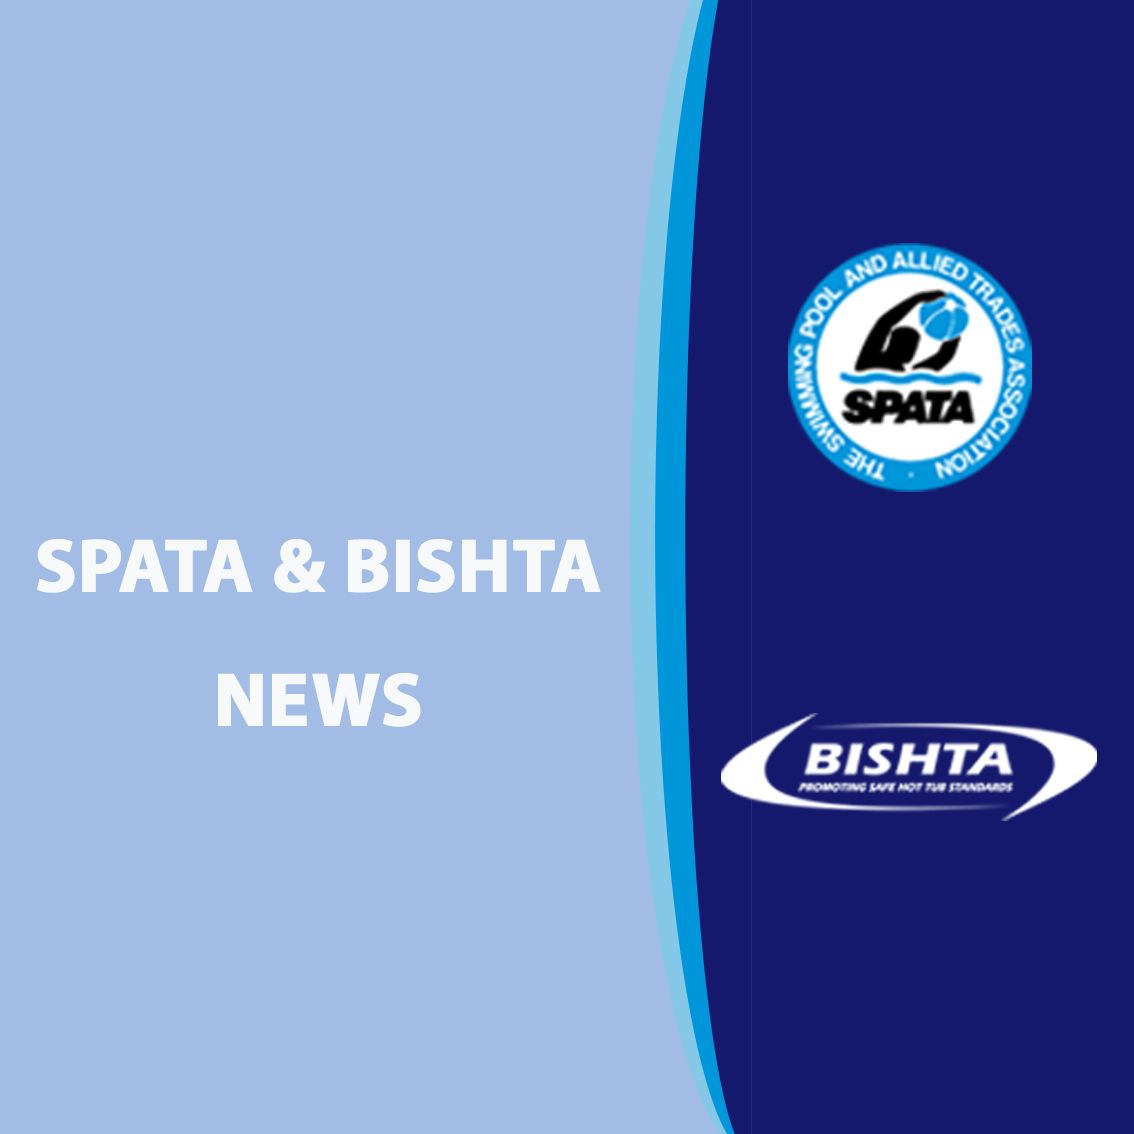 SPATA AND BISHTA NEWS - 4th August 2021